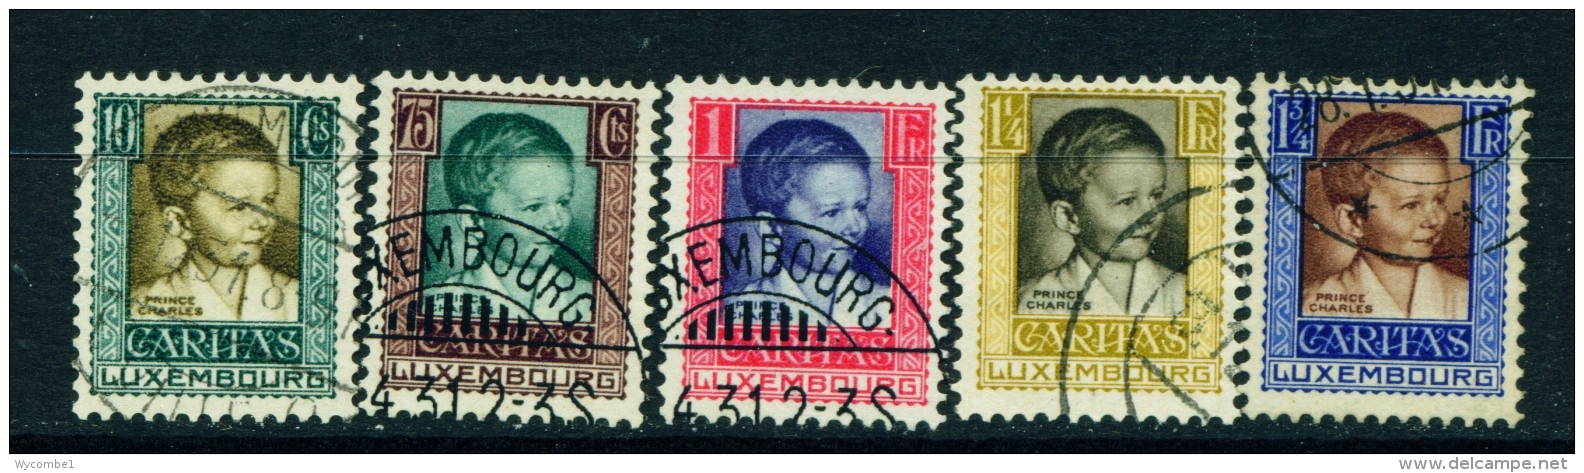 LUXEMBOURG  -  1930  Child Welfare Fund  Set  Used As Scan - Usados